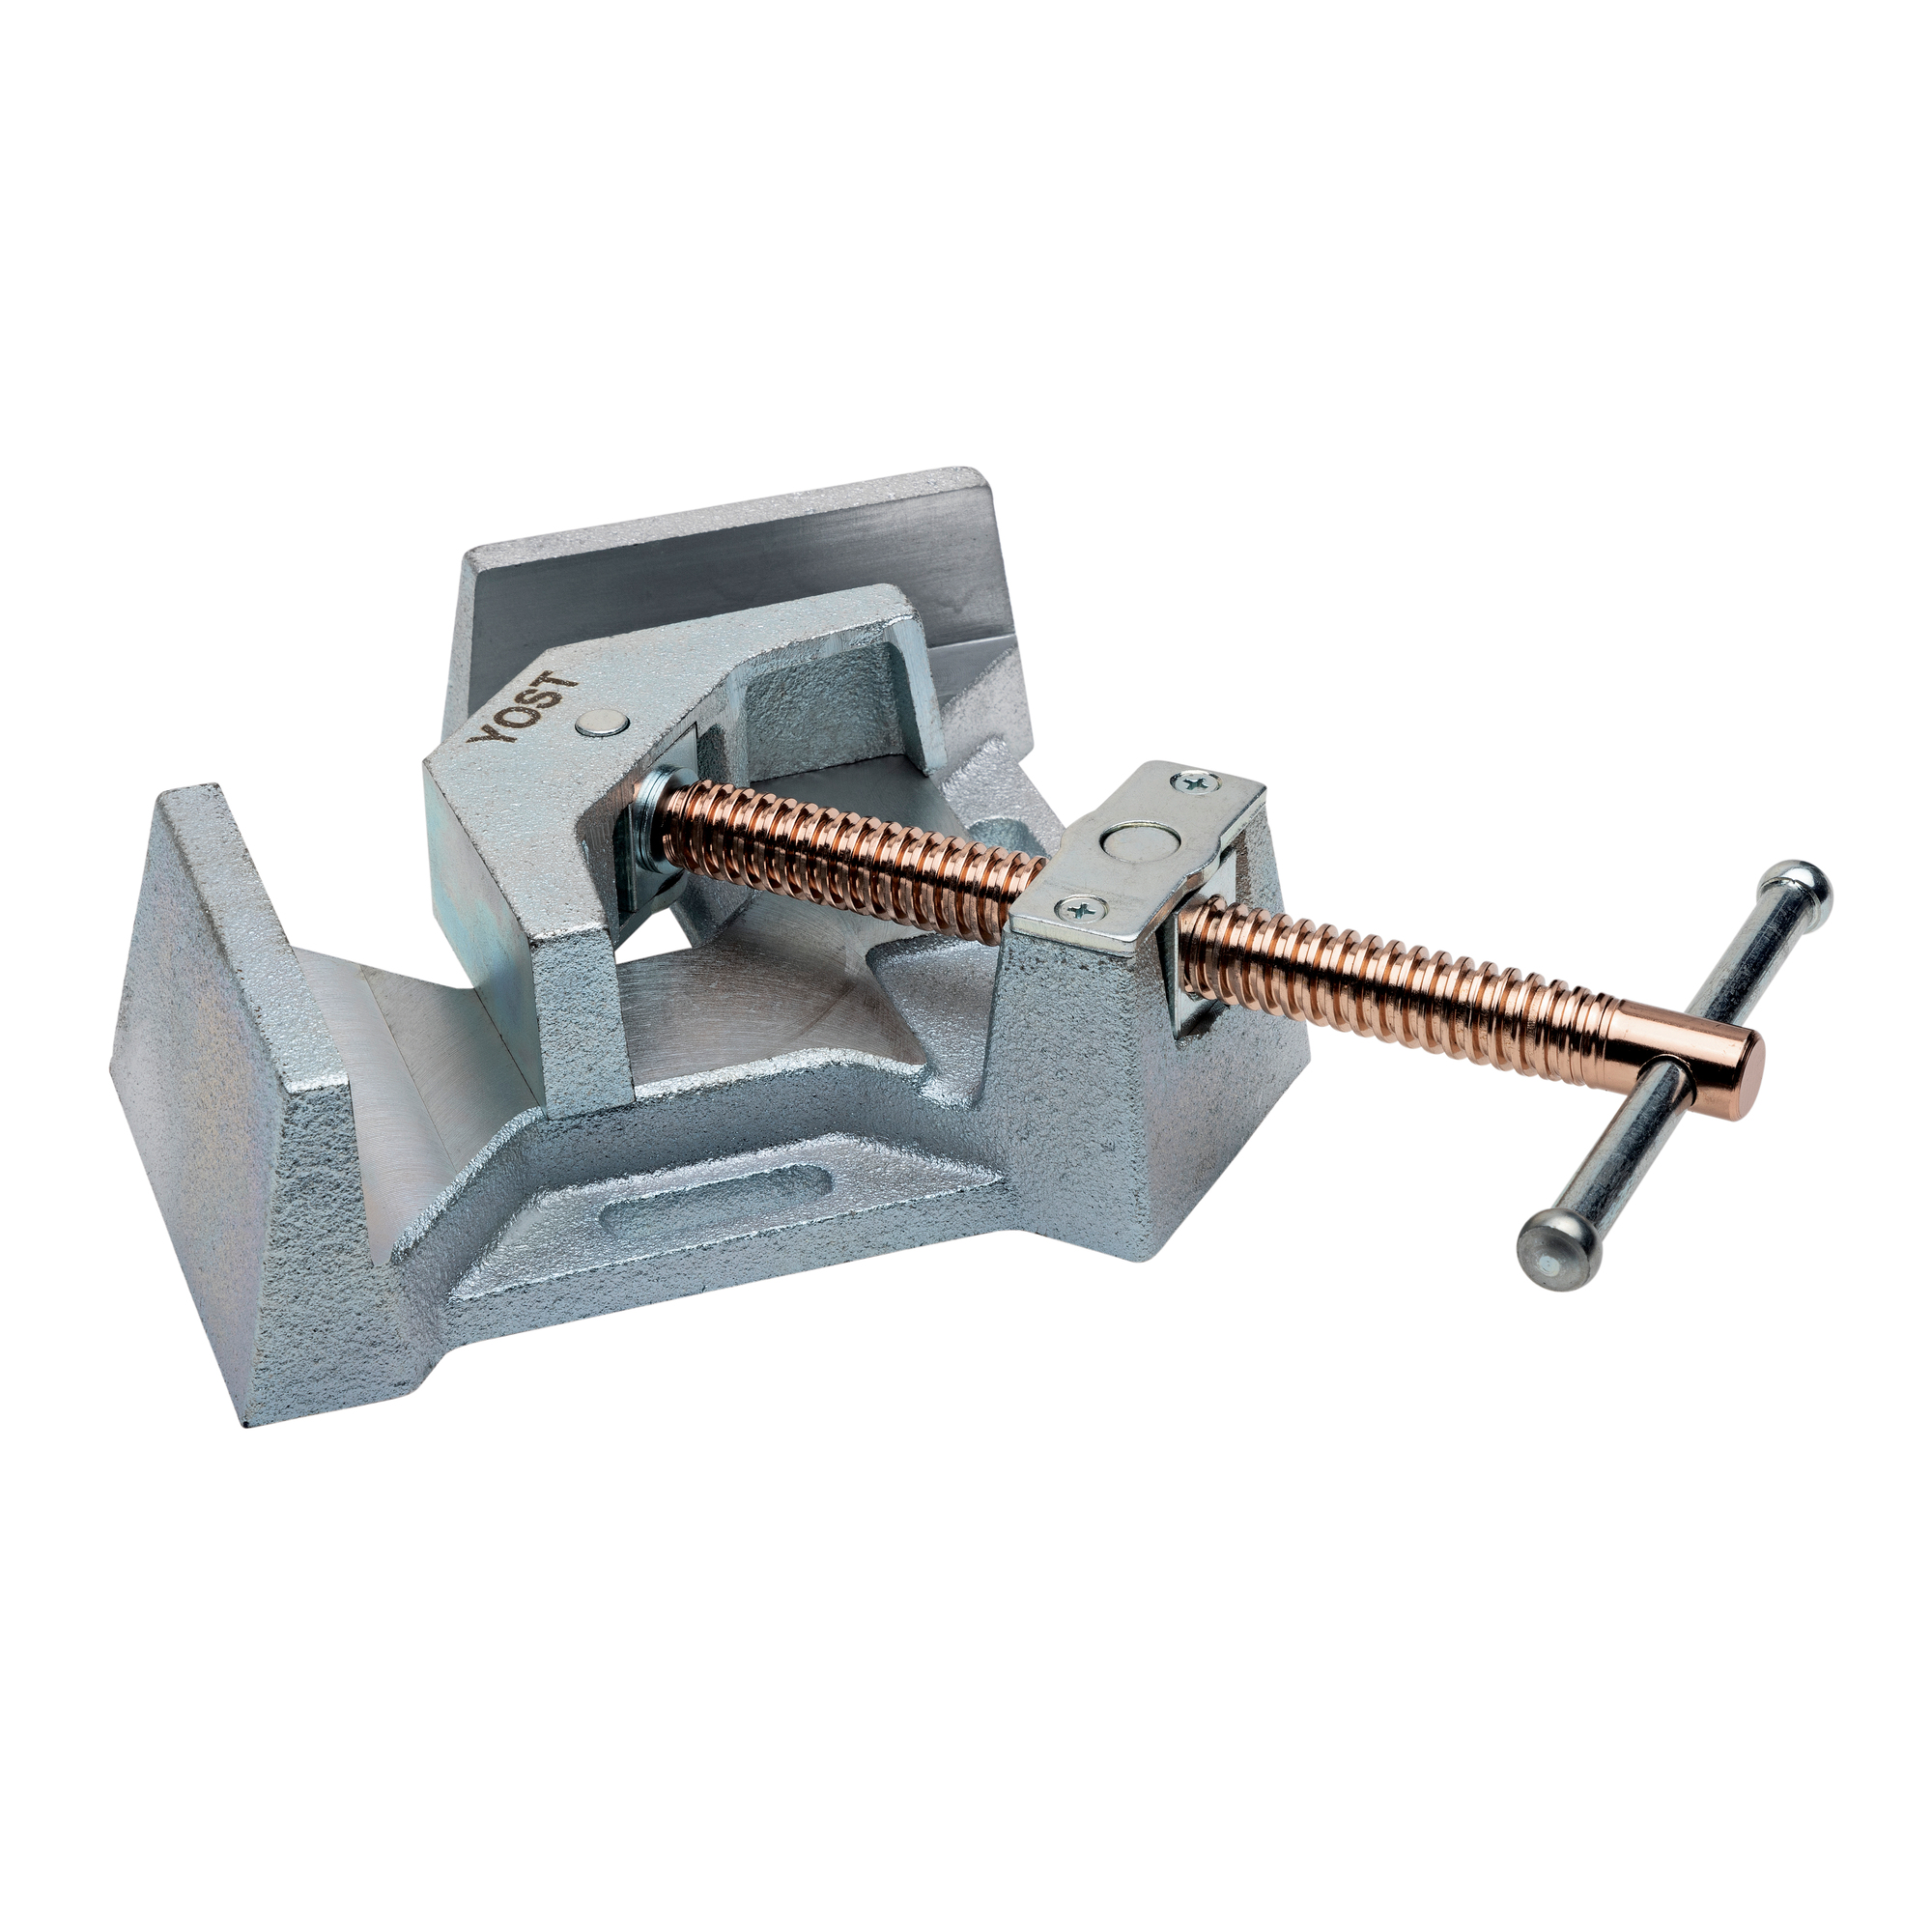 Yost Vises, 7Inch HD Corner Weld Vise, Jaw Width 7 in, Jaw Capacity 3.5 in, Material Ductile Iron, Model WV-7HD